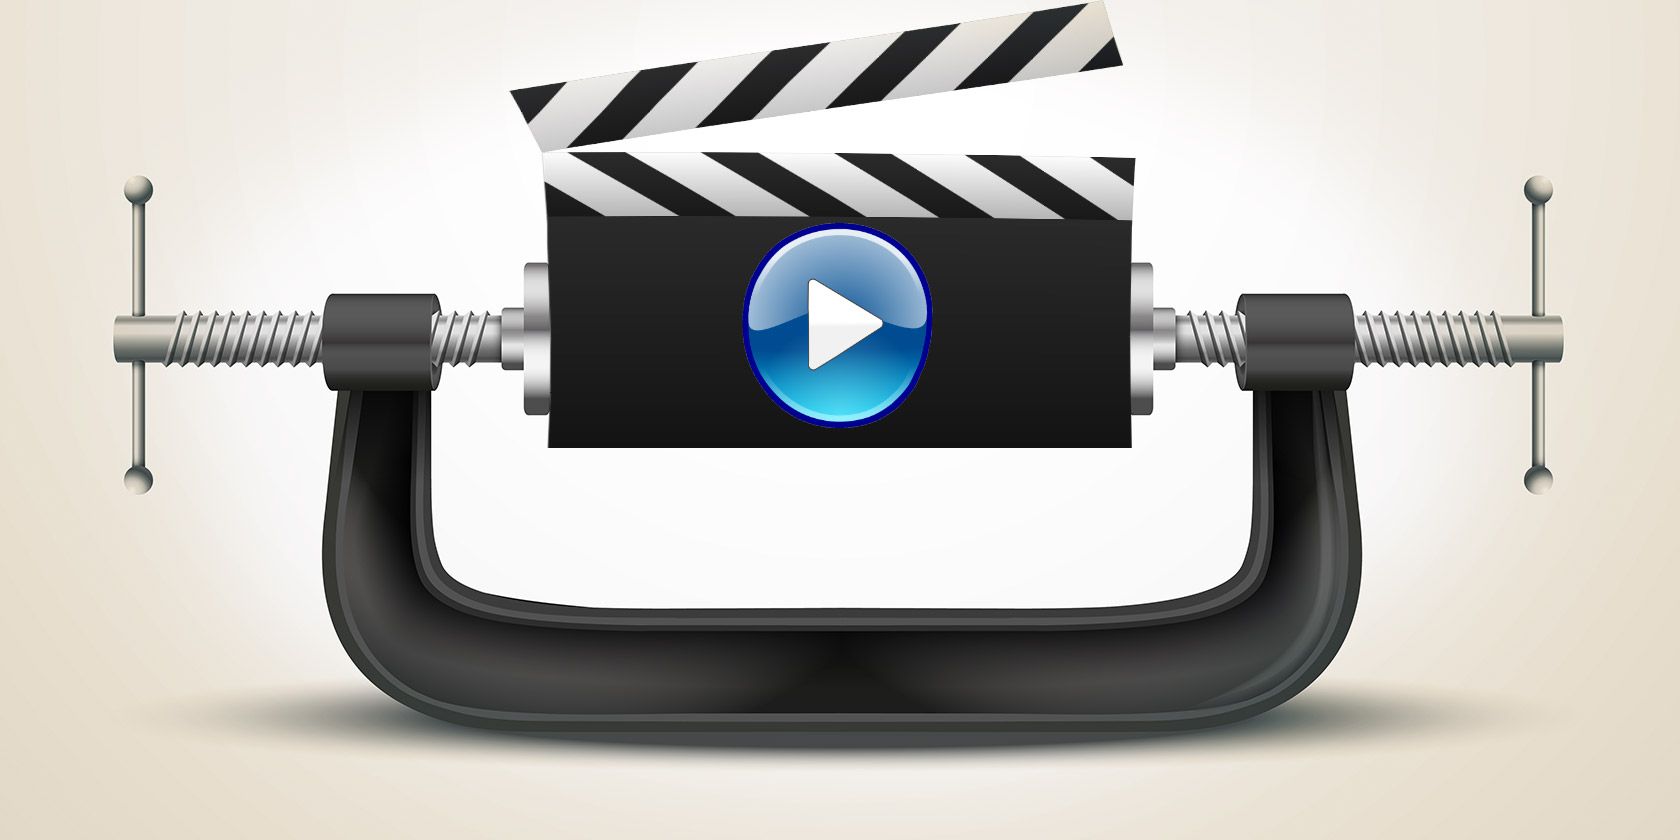 how to compress video files with windows live movie maker